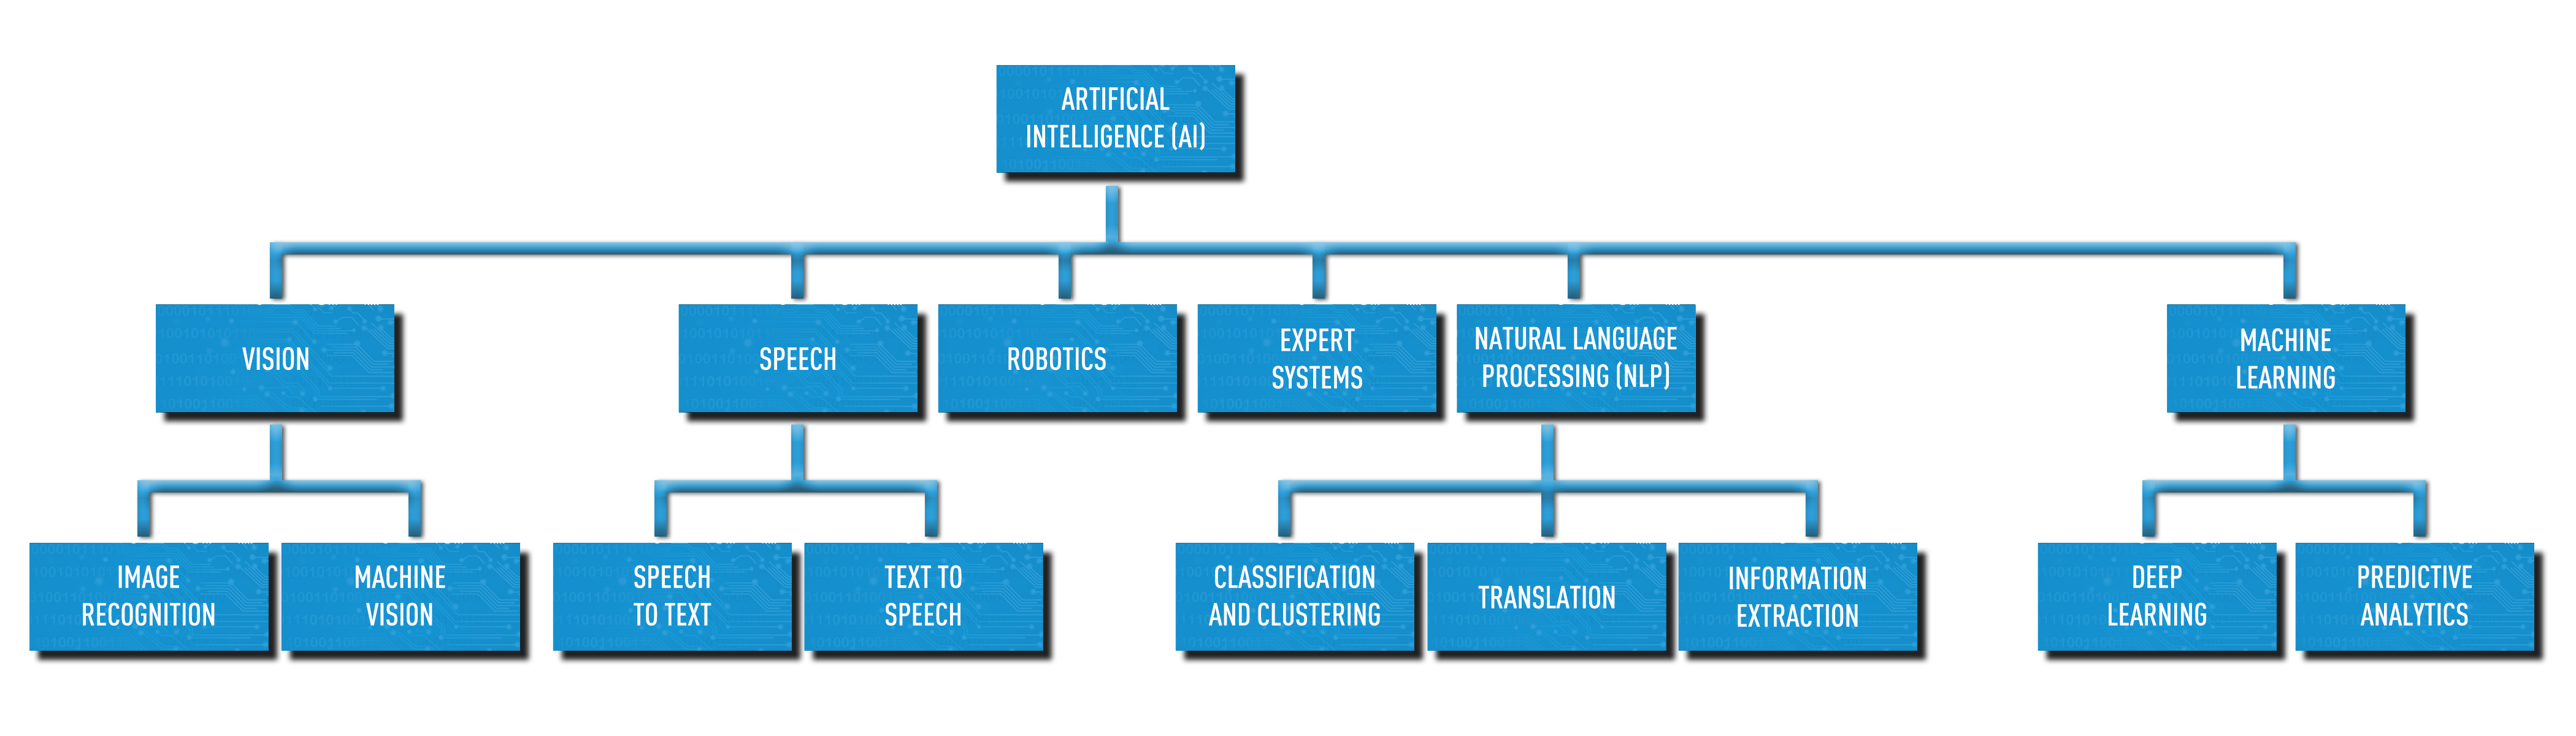 Figure 1 - Types of Artificial Intelligence